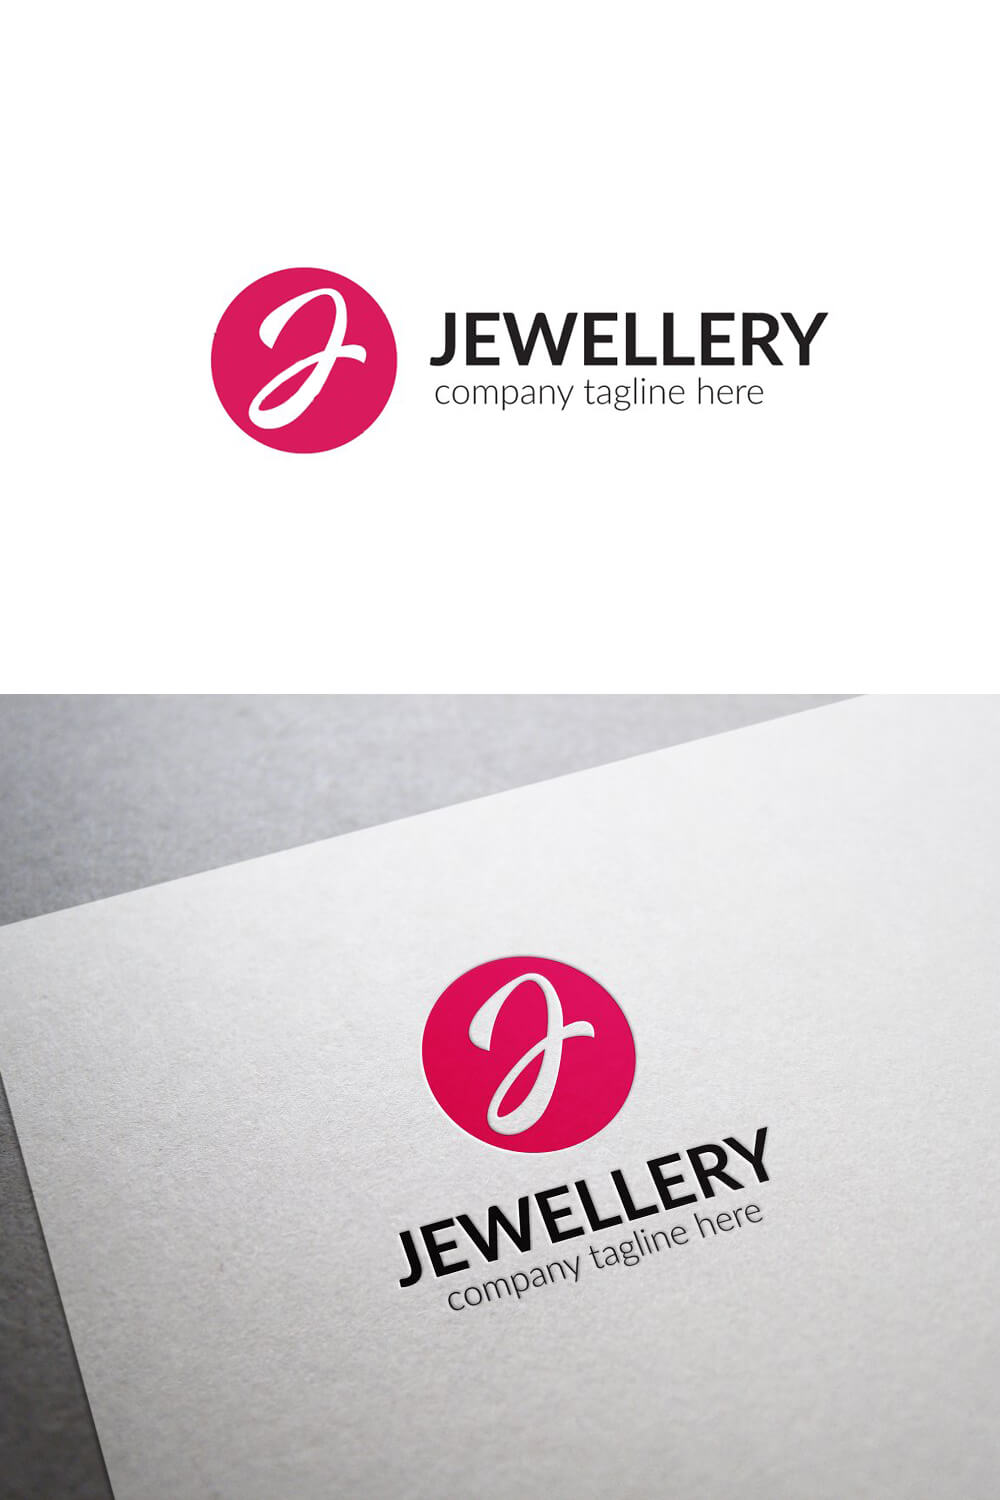 Two red J jewelry logos on a white and gray background.